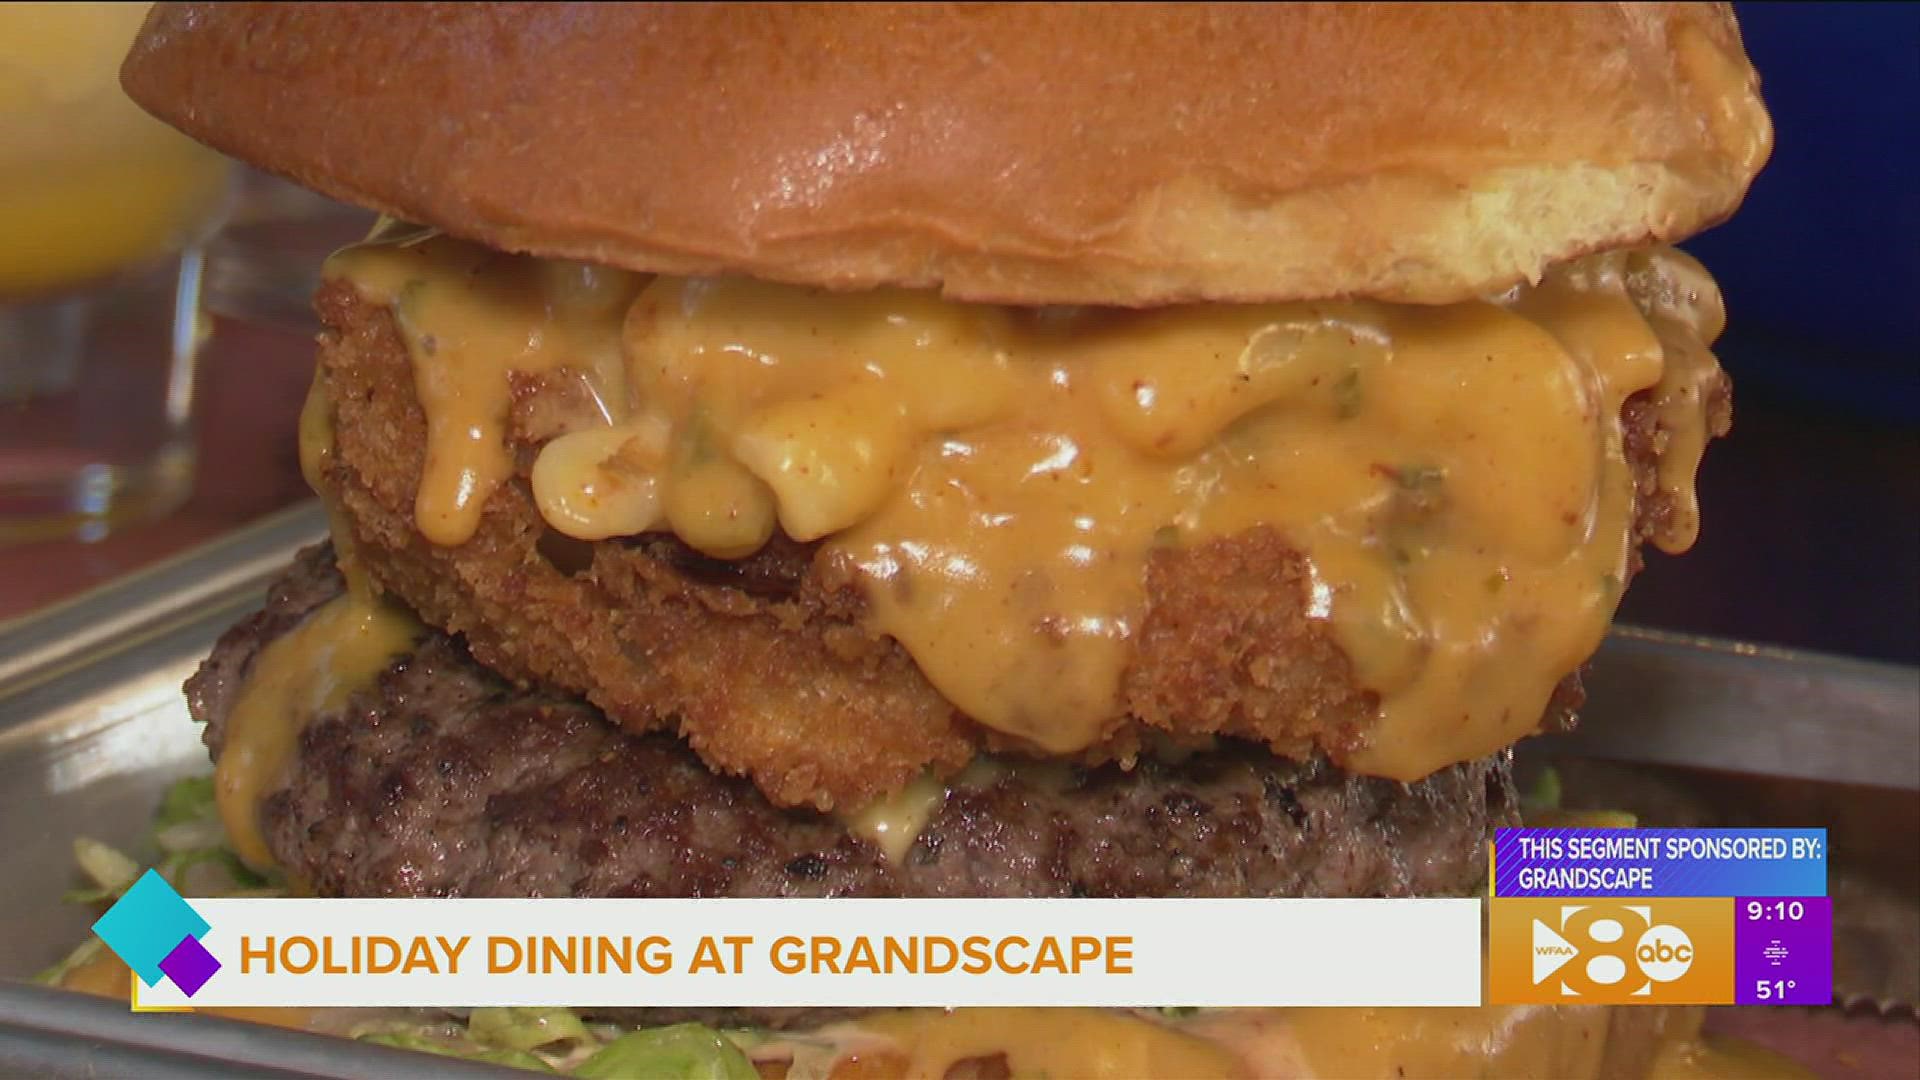 We find out where to go when you're hungry at Grandscape. This segment is sponsored by Grandscape. Go to grandscape.com/directory-listings/dining for more info.